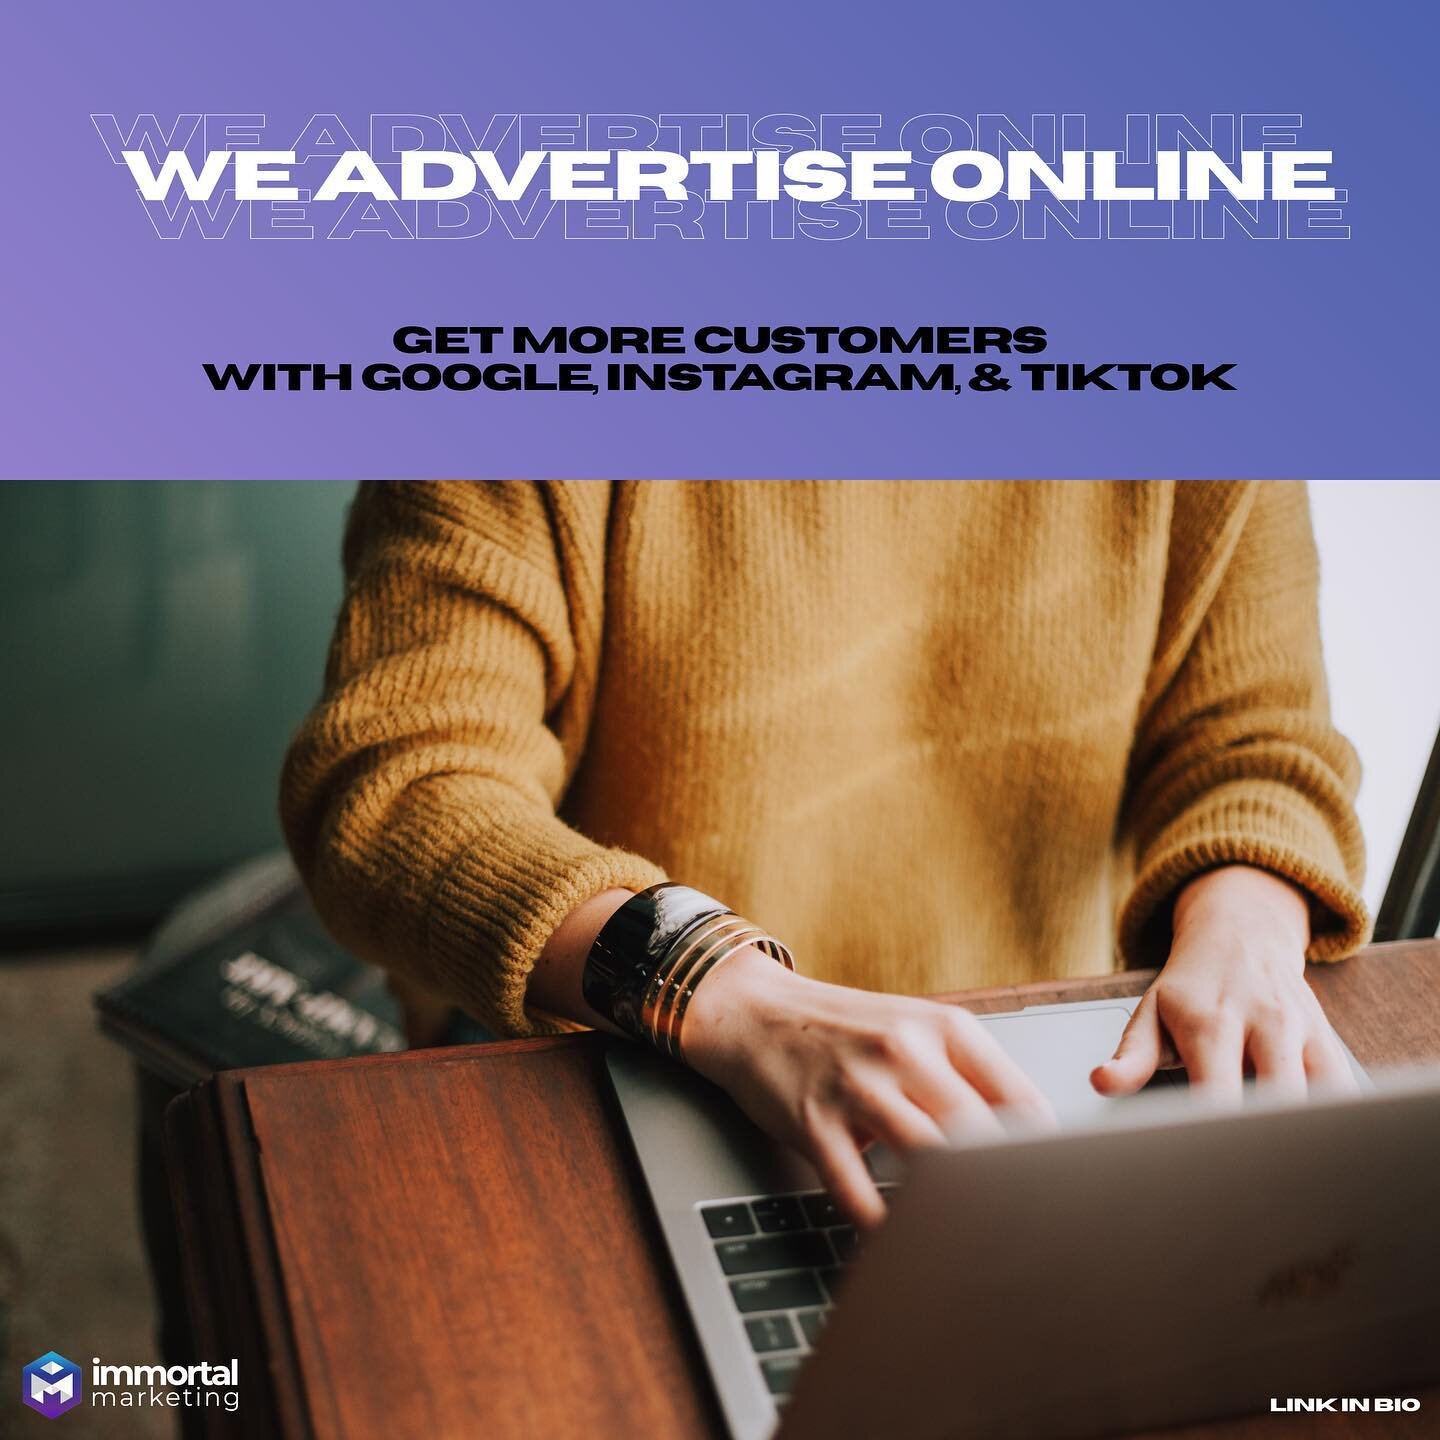 For those looking to get more customers,

Advertise Online &amp; Get Even More Paying Customers On Repeat 

For $10/day, we can help you start advertising online and increase your chances of reaching more customers on Google, YouTube, Facebook, Insta